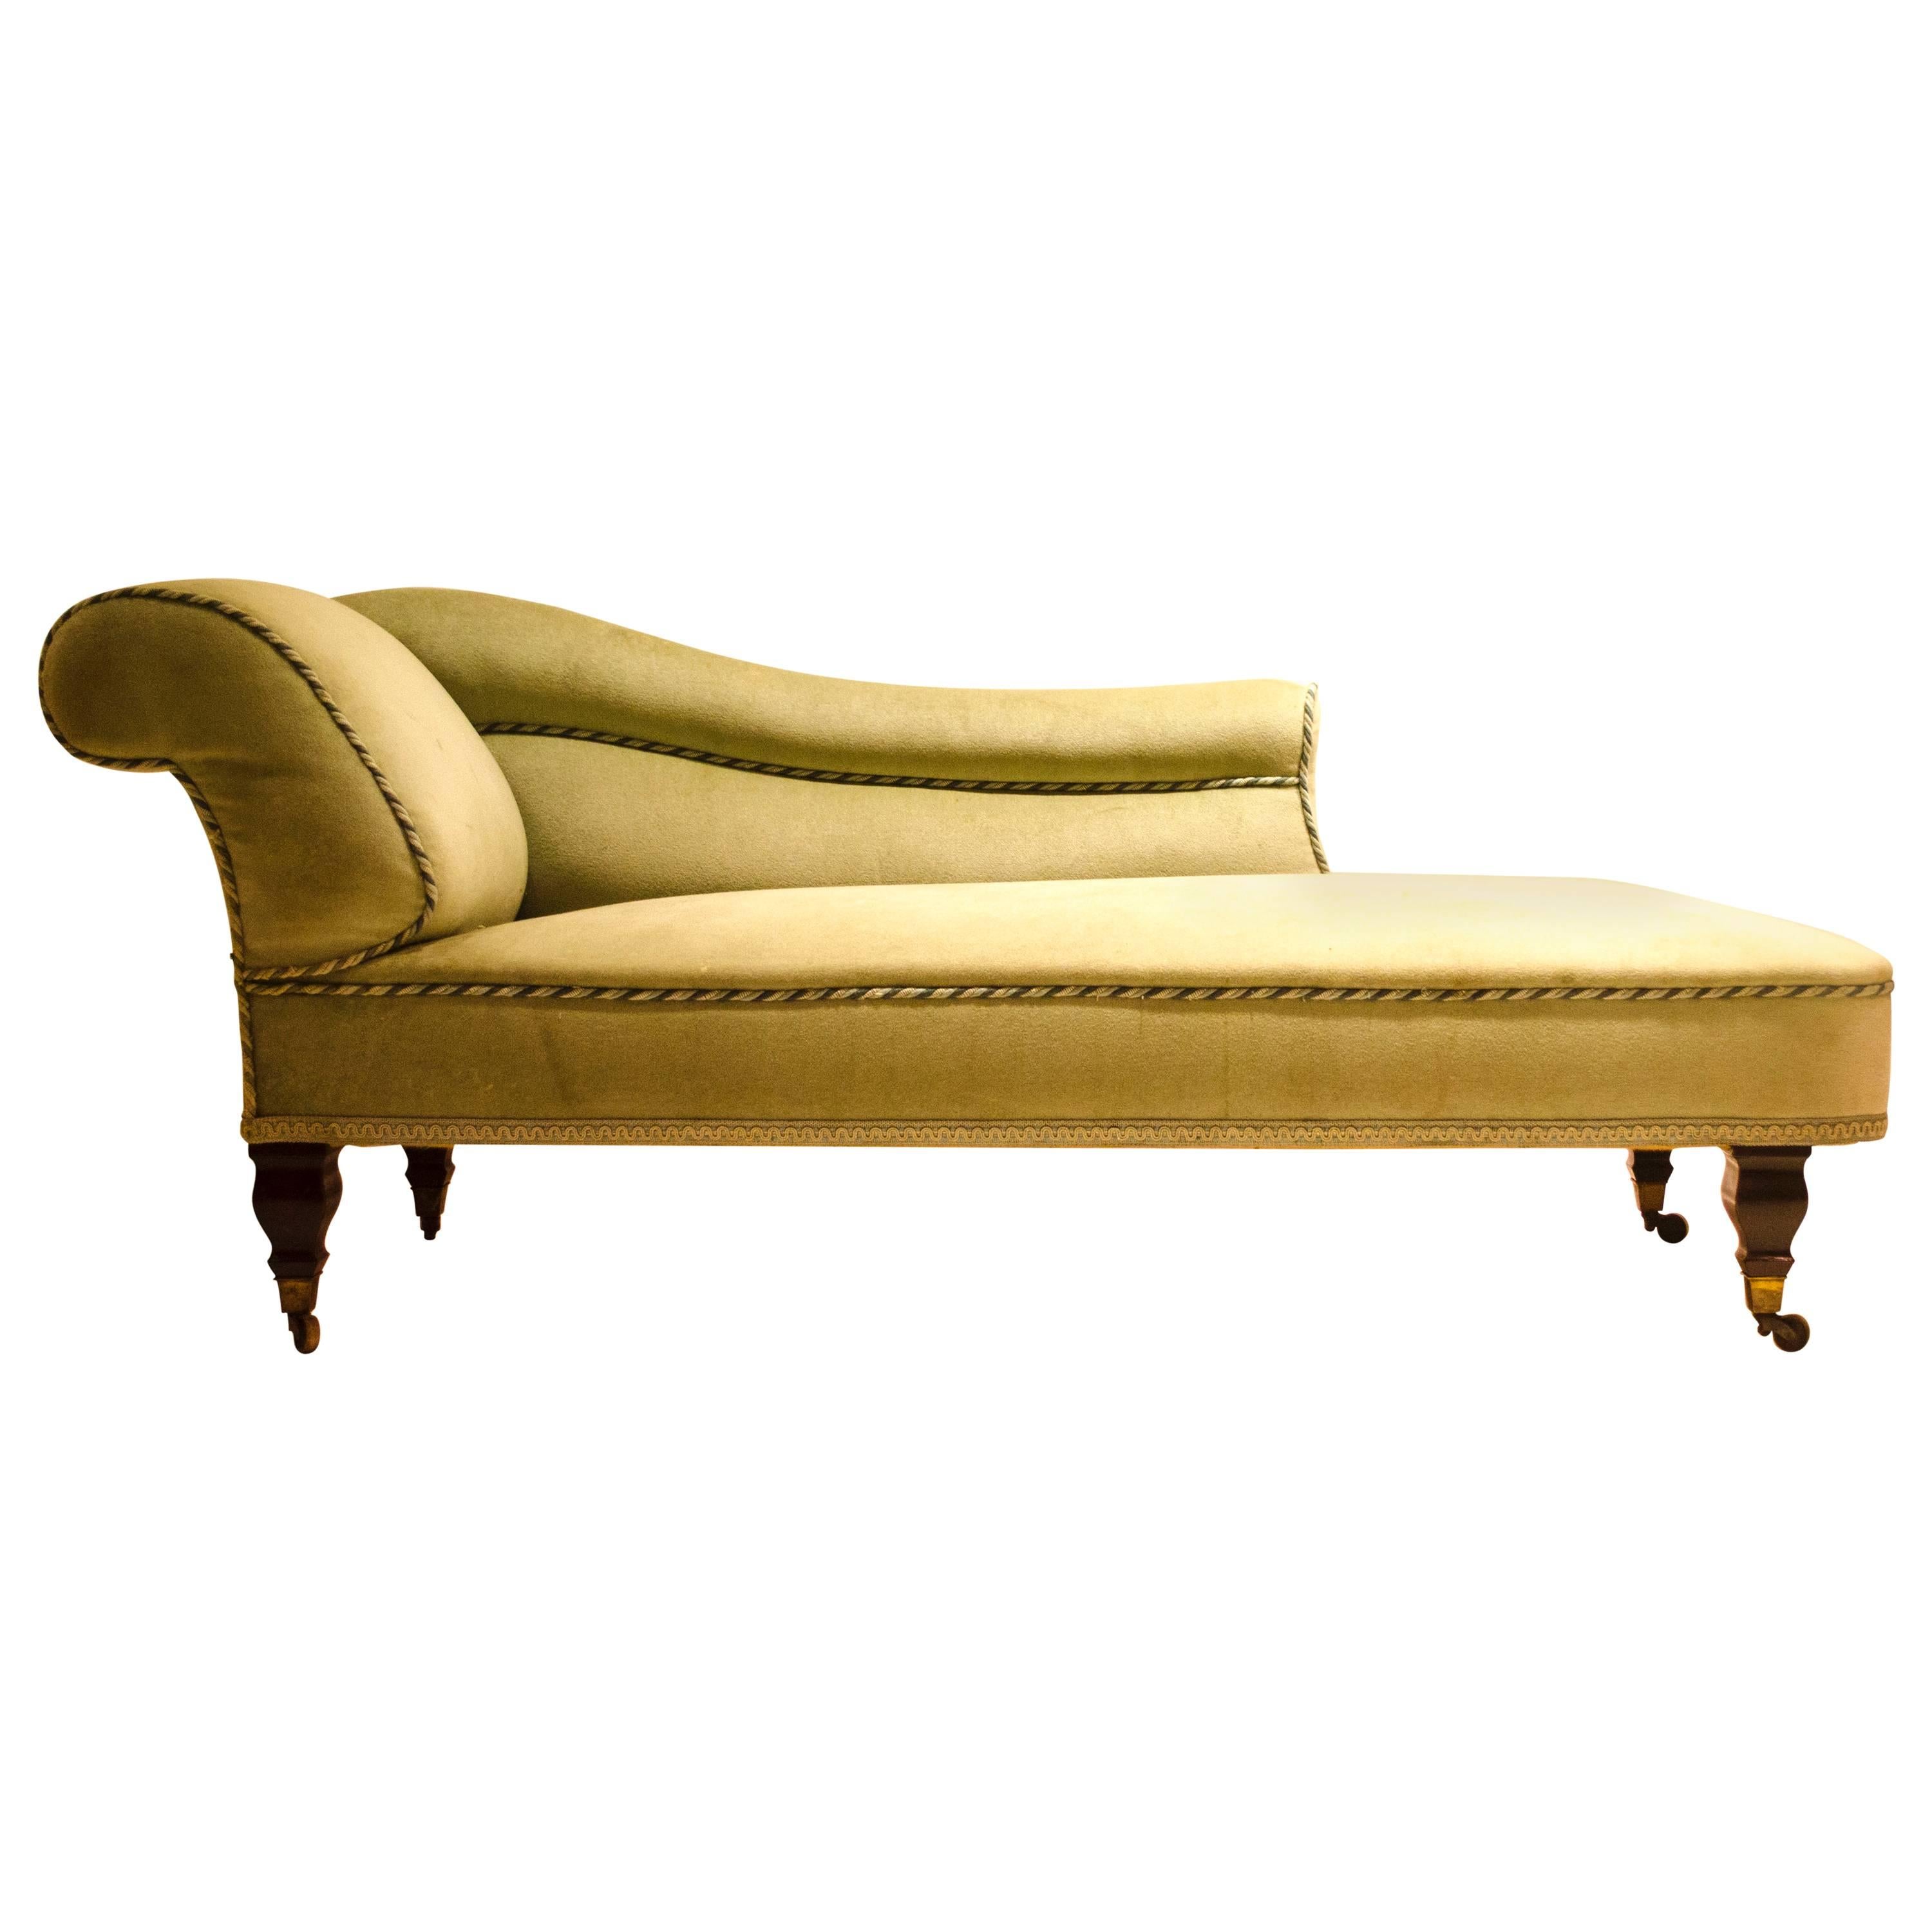 George Jack for Morris and Co An Arts and Crafts, Saville Chaise Lounge